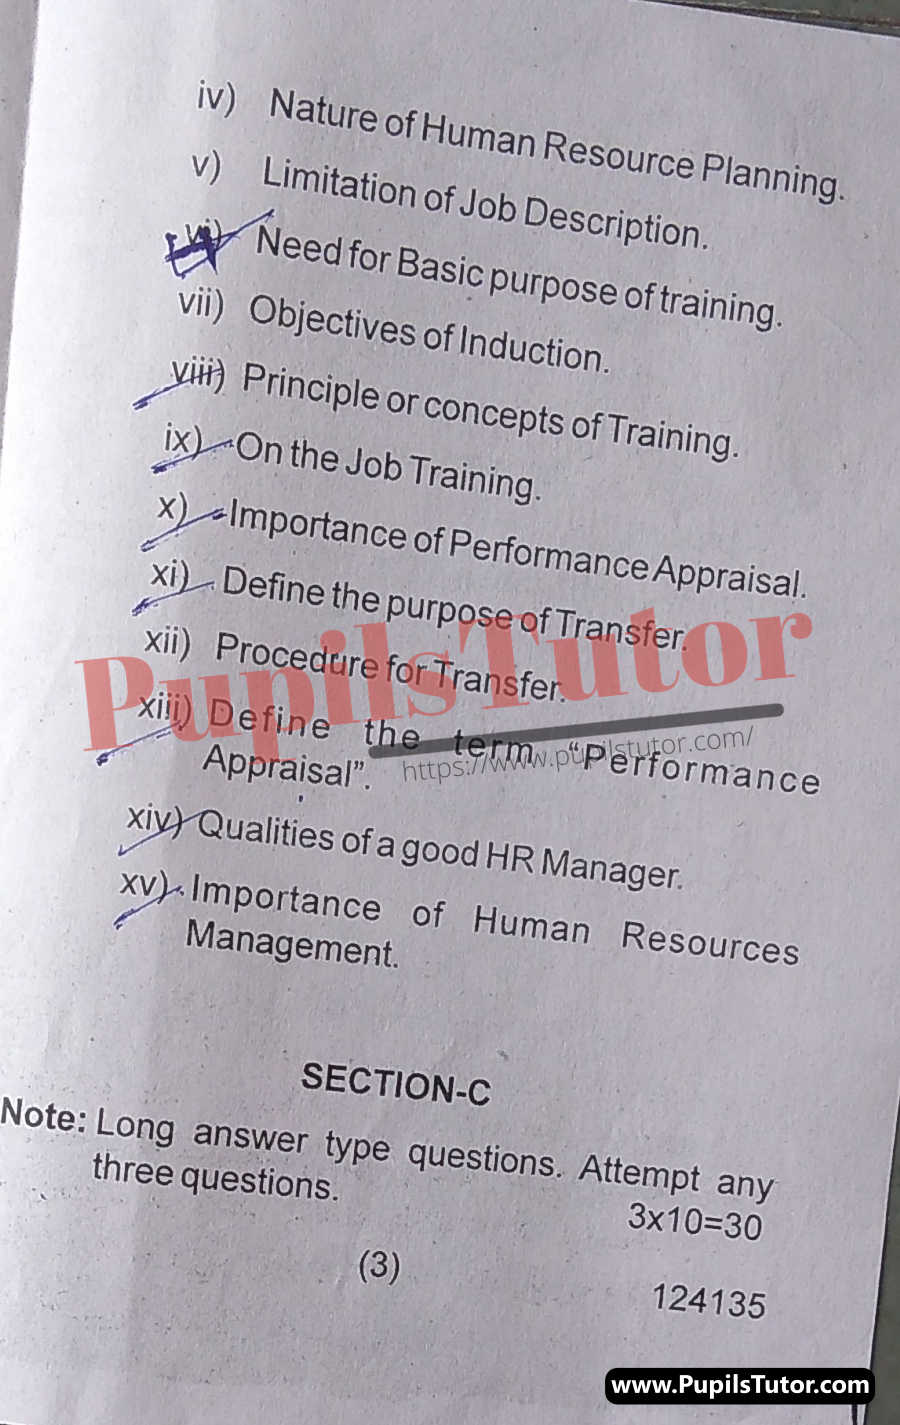 Free Download PDF Of Haryana State Board of Technical Education (HSBTE) FAA (Finance Accounts And Auditing) Third Semester Latest Question Paper For Human Resource Management Subject (Page 3) - https://www.pupilstutor.com